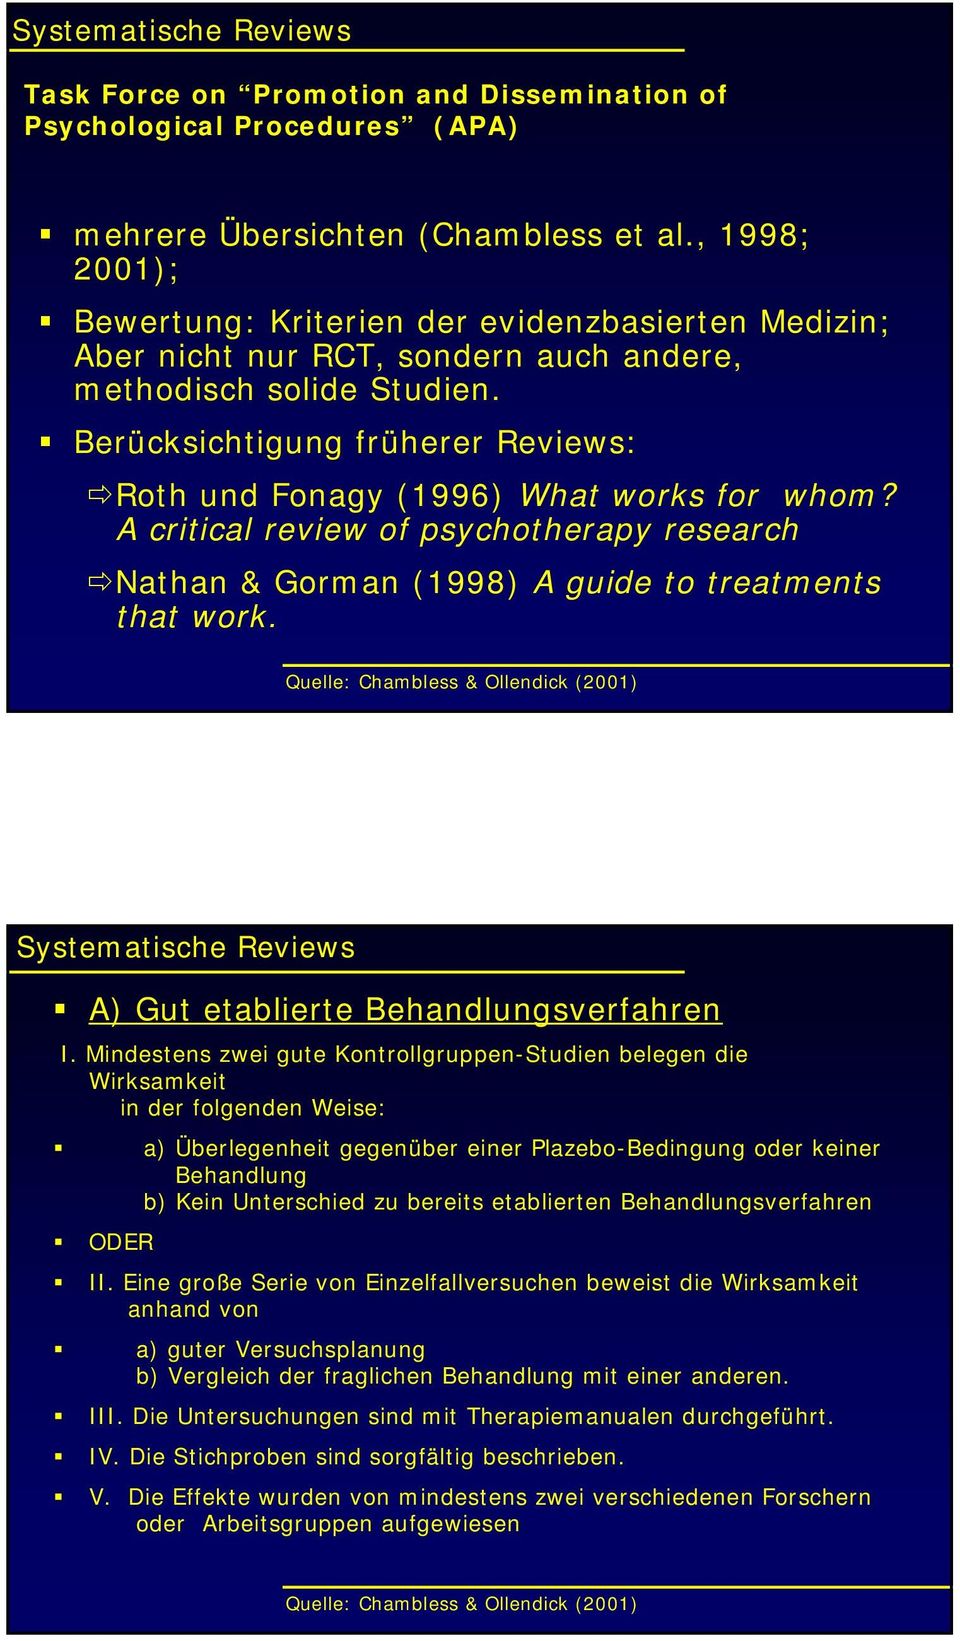 Berücksichtigung früherer Reviews: Roth und Fonagy (1996) What works for whom? A critical review of psychotherapy research Nathan & Gorman (1998) A guide to treatments that work.